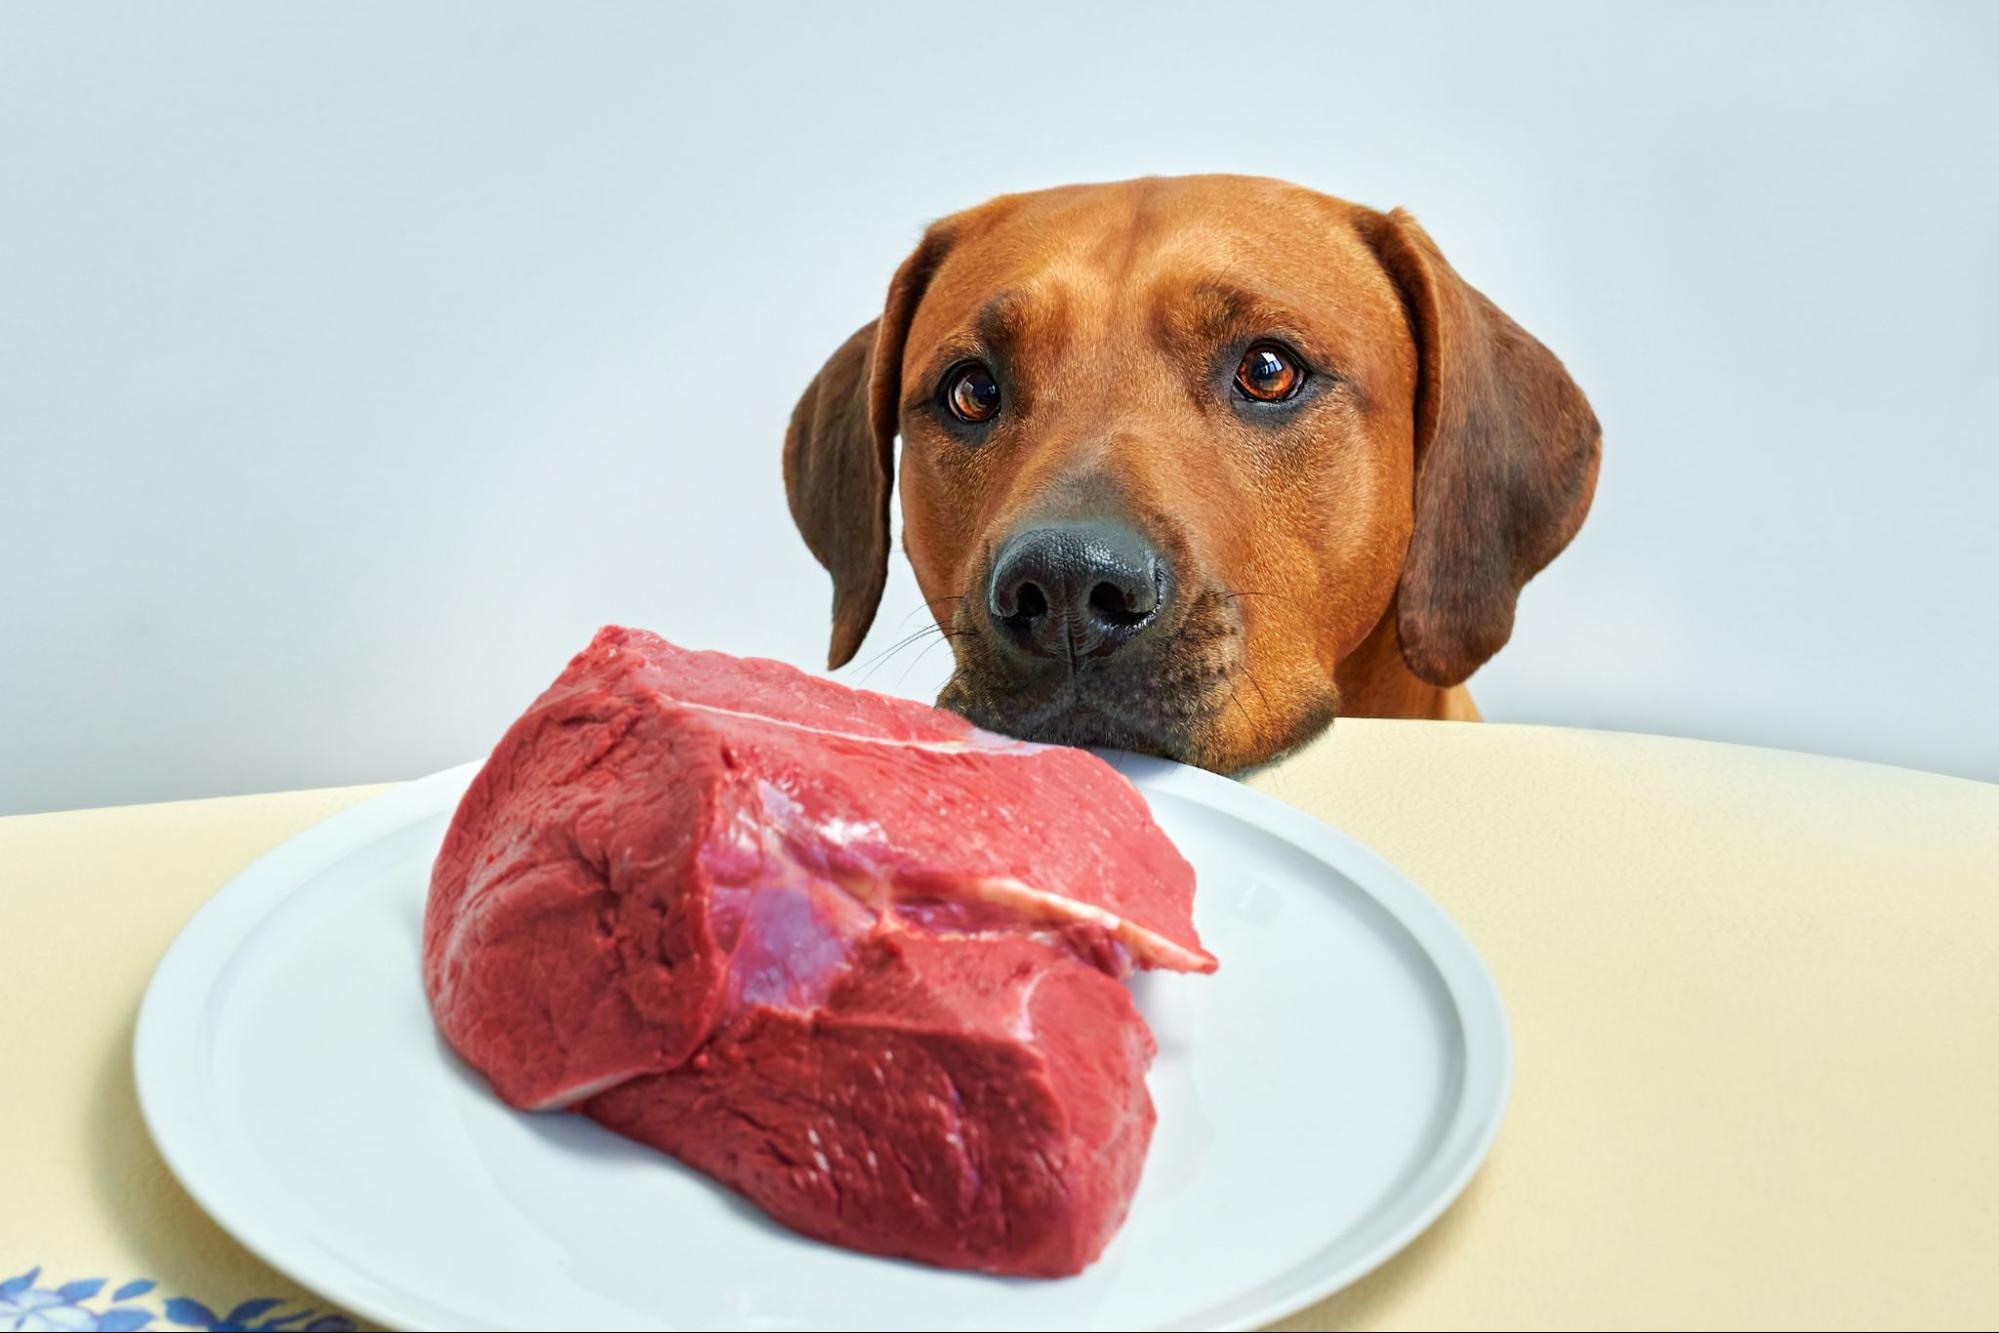 a dog looking at a raw piece of meat on a plate.